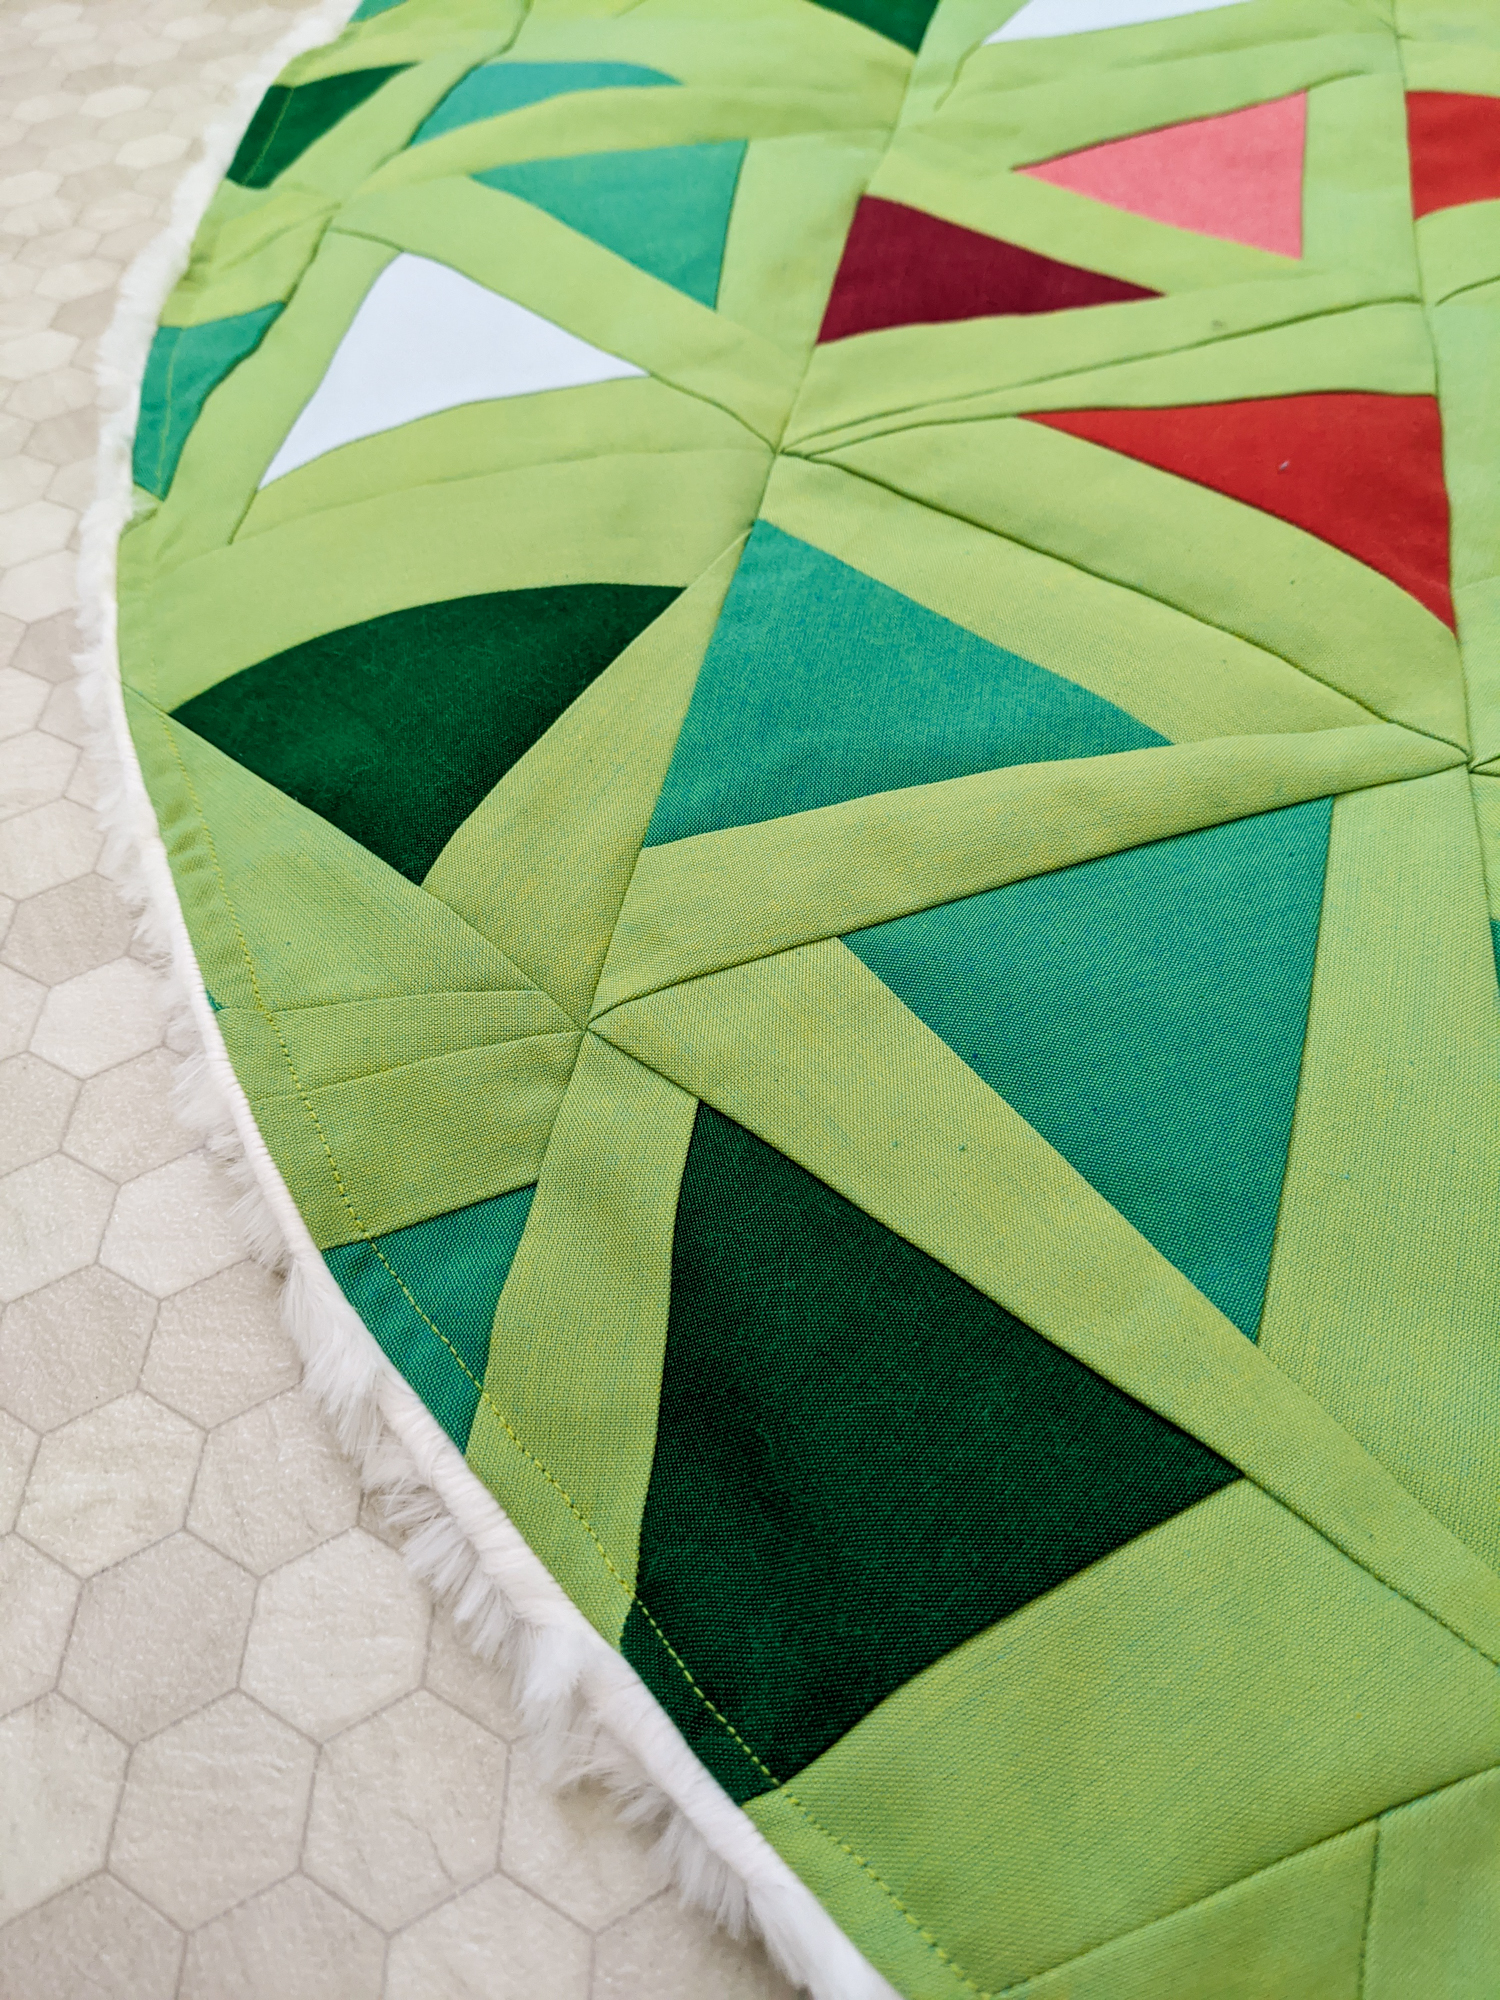 This DIY Patchwork Tree Skirt tutorial walks you through sewing a Christmas tree skirt based on the Perennial Quilt Pattern by Suzy Quilts